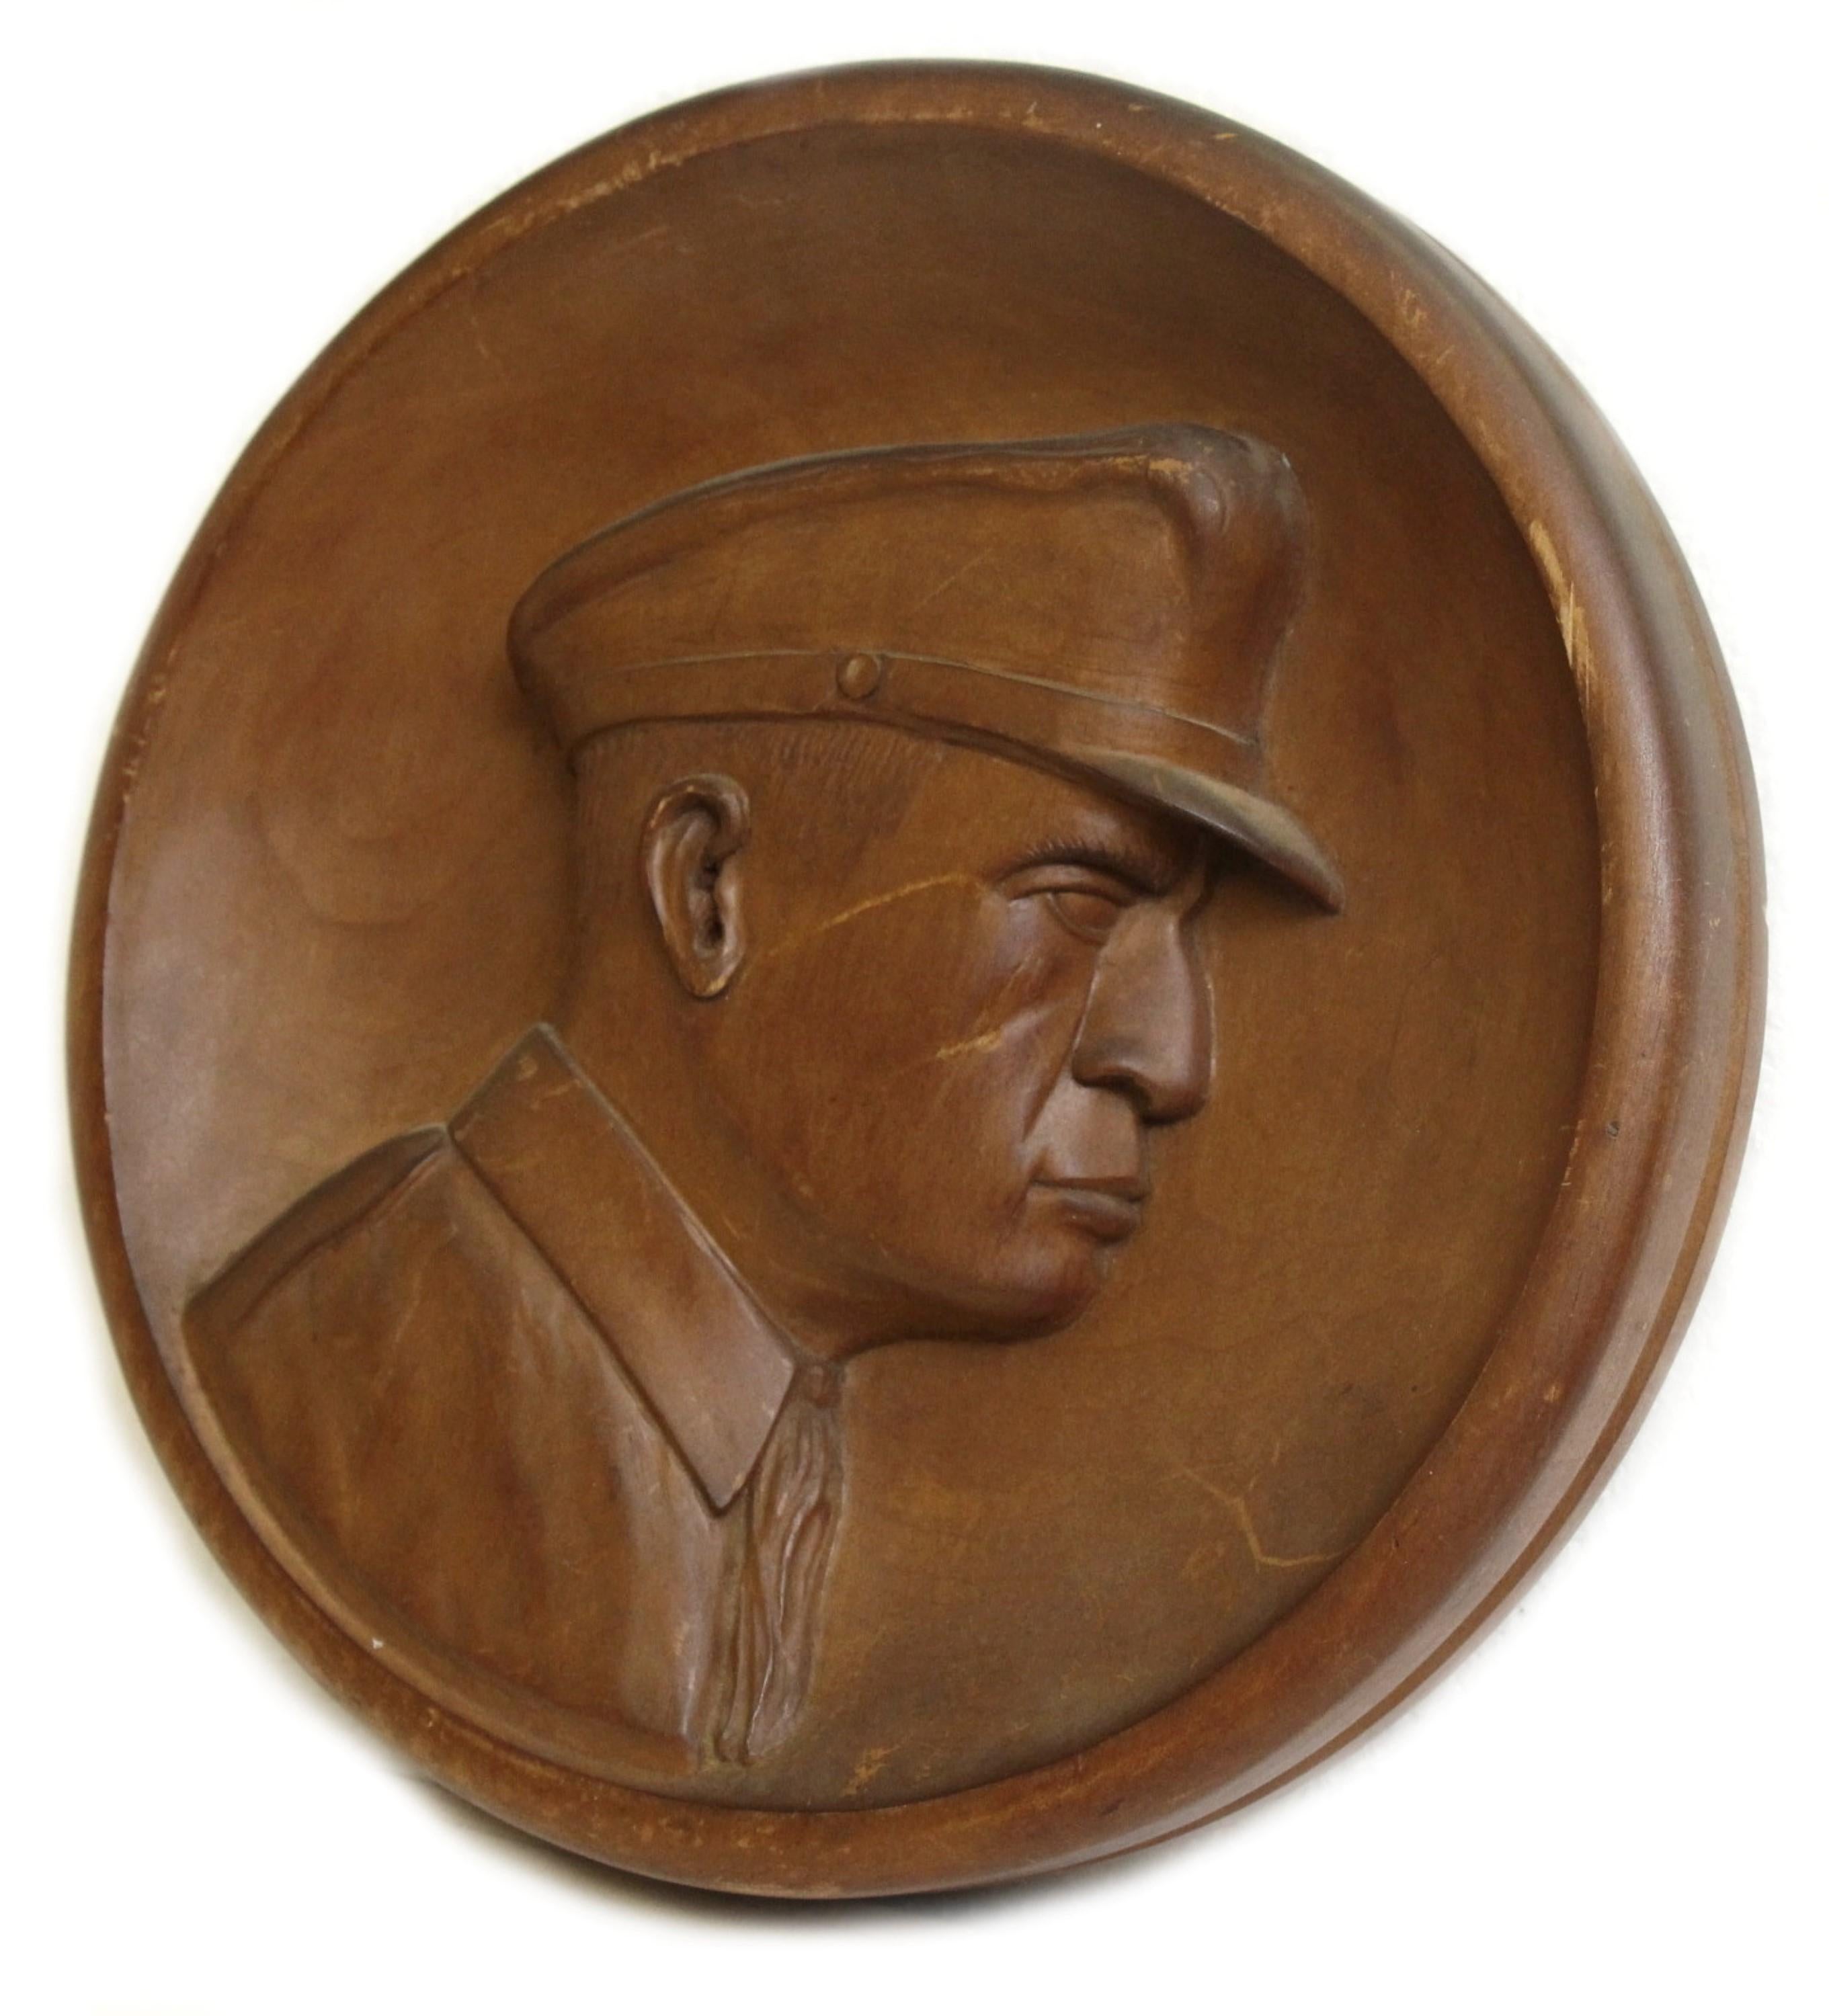 Mid-20th Century hand carved wood plaque of General MacArthur. Signed A.B. Deleourey 1856-1944 Boston, MA. Minor scratches. This can be seen at our 400 Gilligan St location in Scranton, PA.